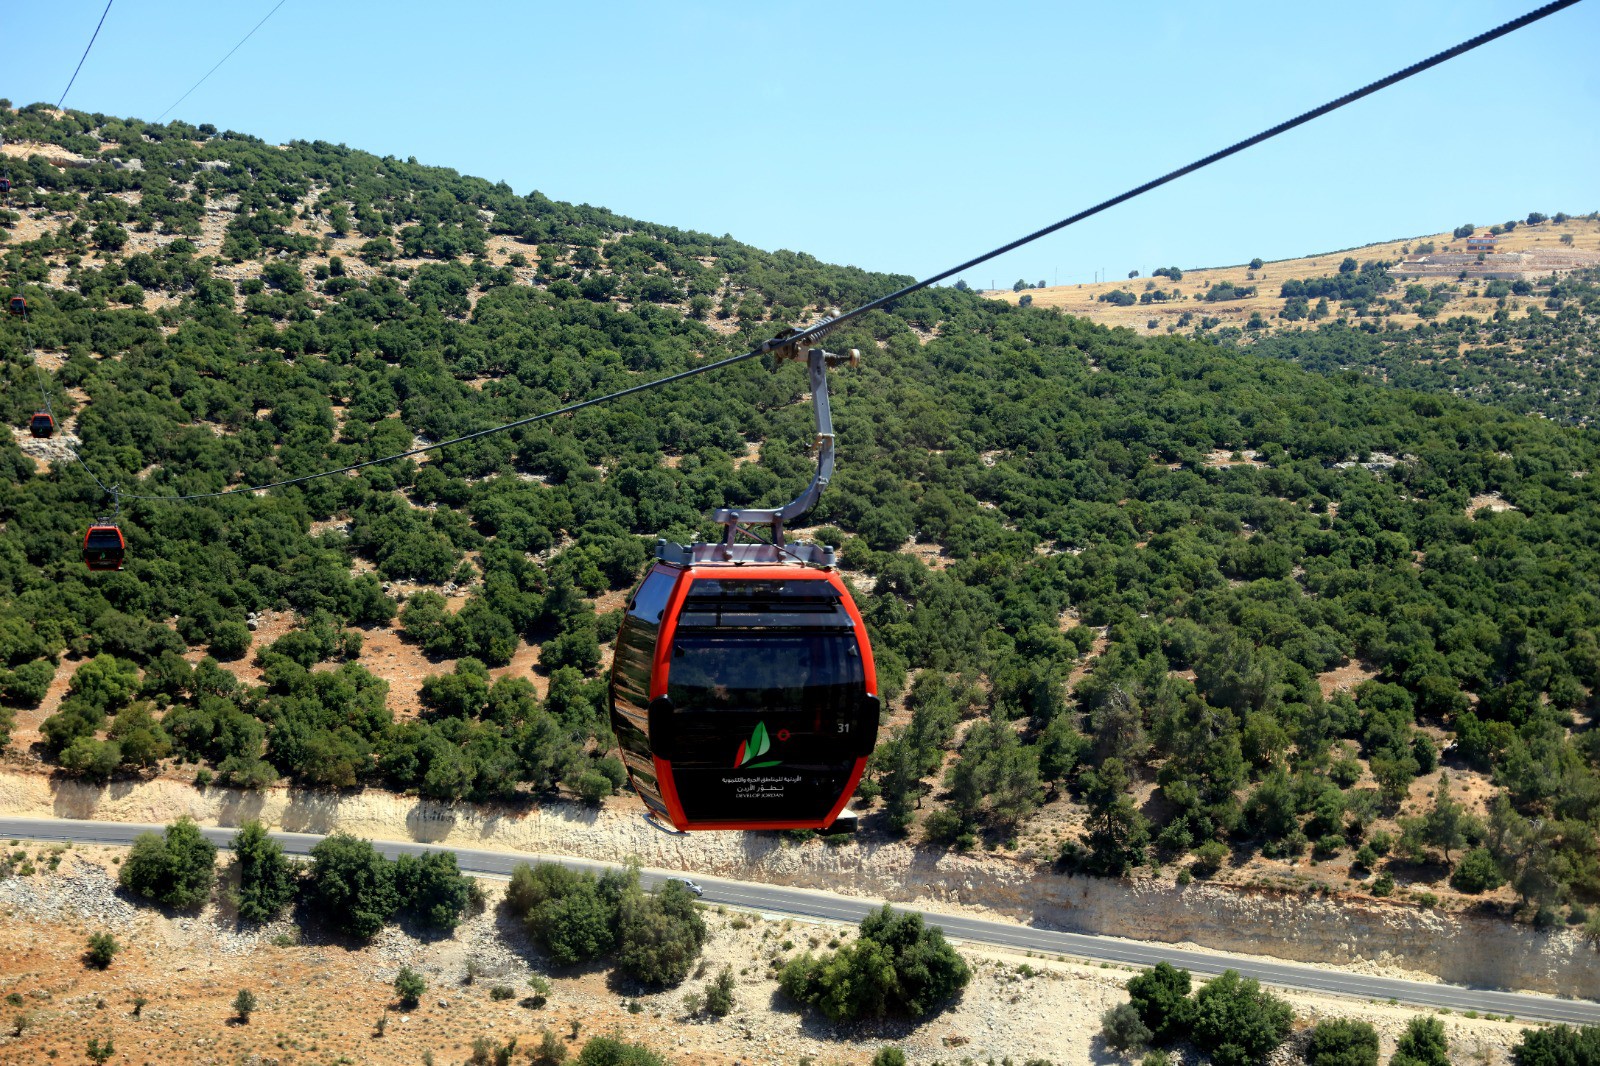 Full Day Private Tour from Amman to Ajloun with Ajloun Cable Car Experience